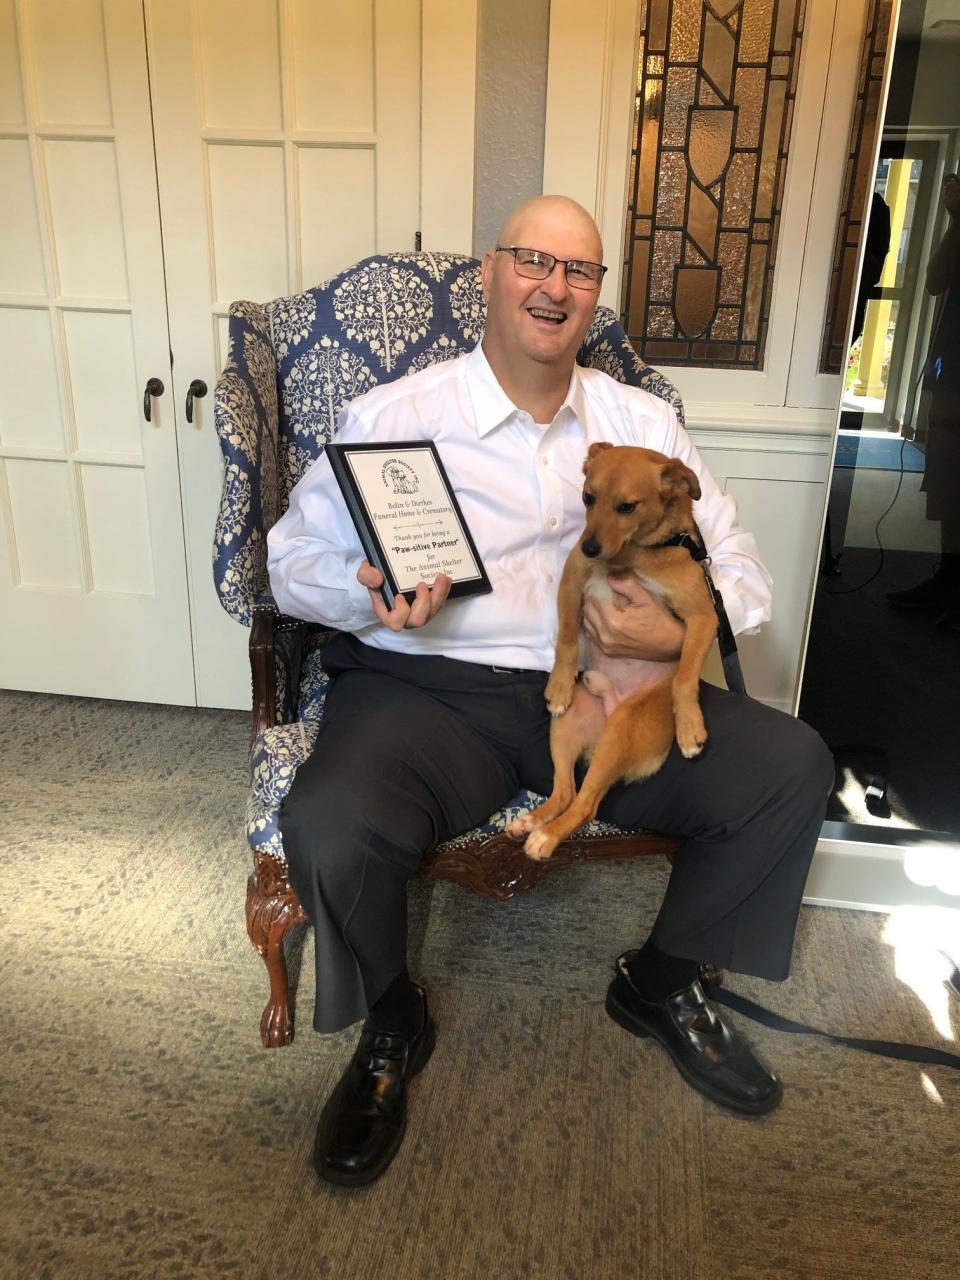 Ty Dierkes was presented with the Paw-sitive Partner award for his service with The Animal Shelter Society. Dierkes served on the board for almost three years, and the board room will be dedicated to him, including a plaque by the door.